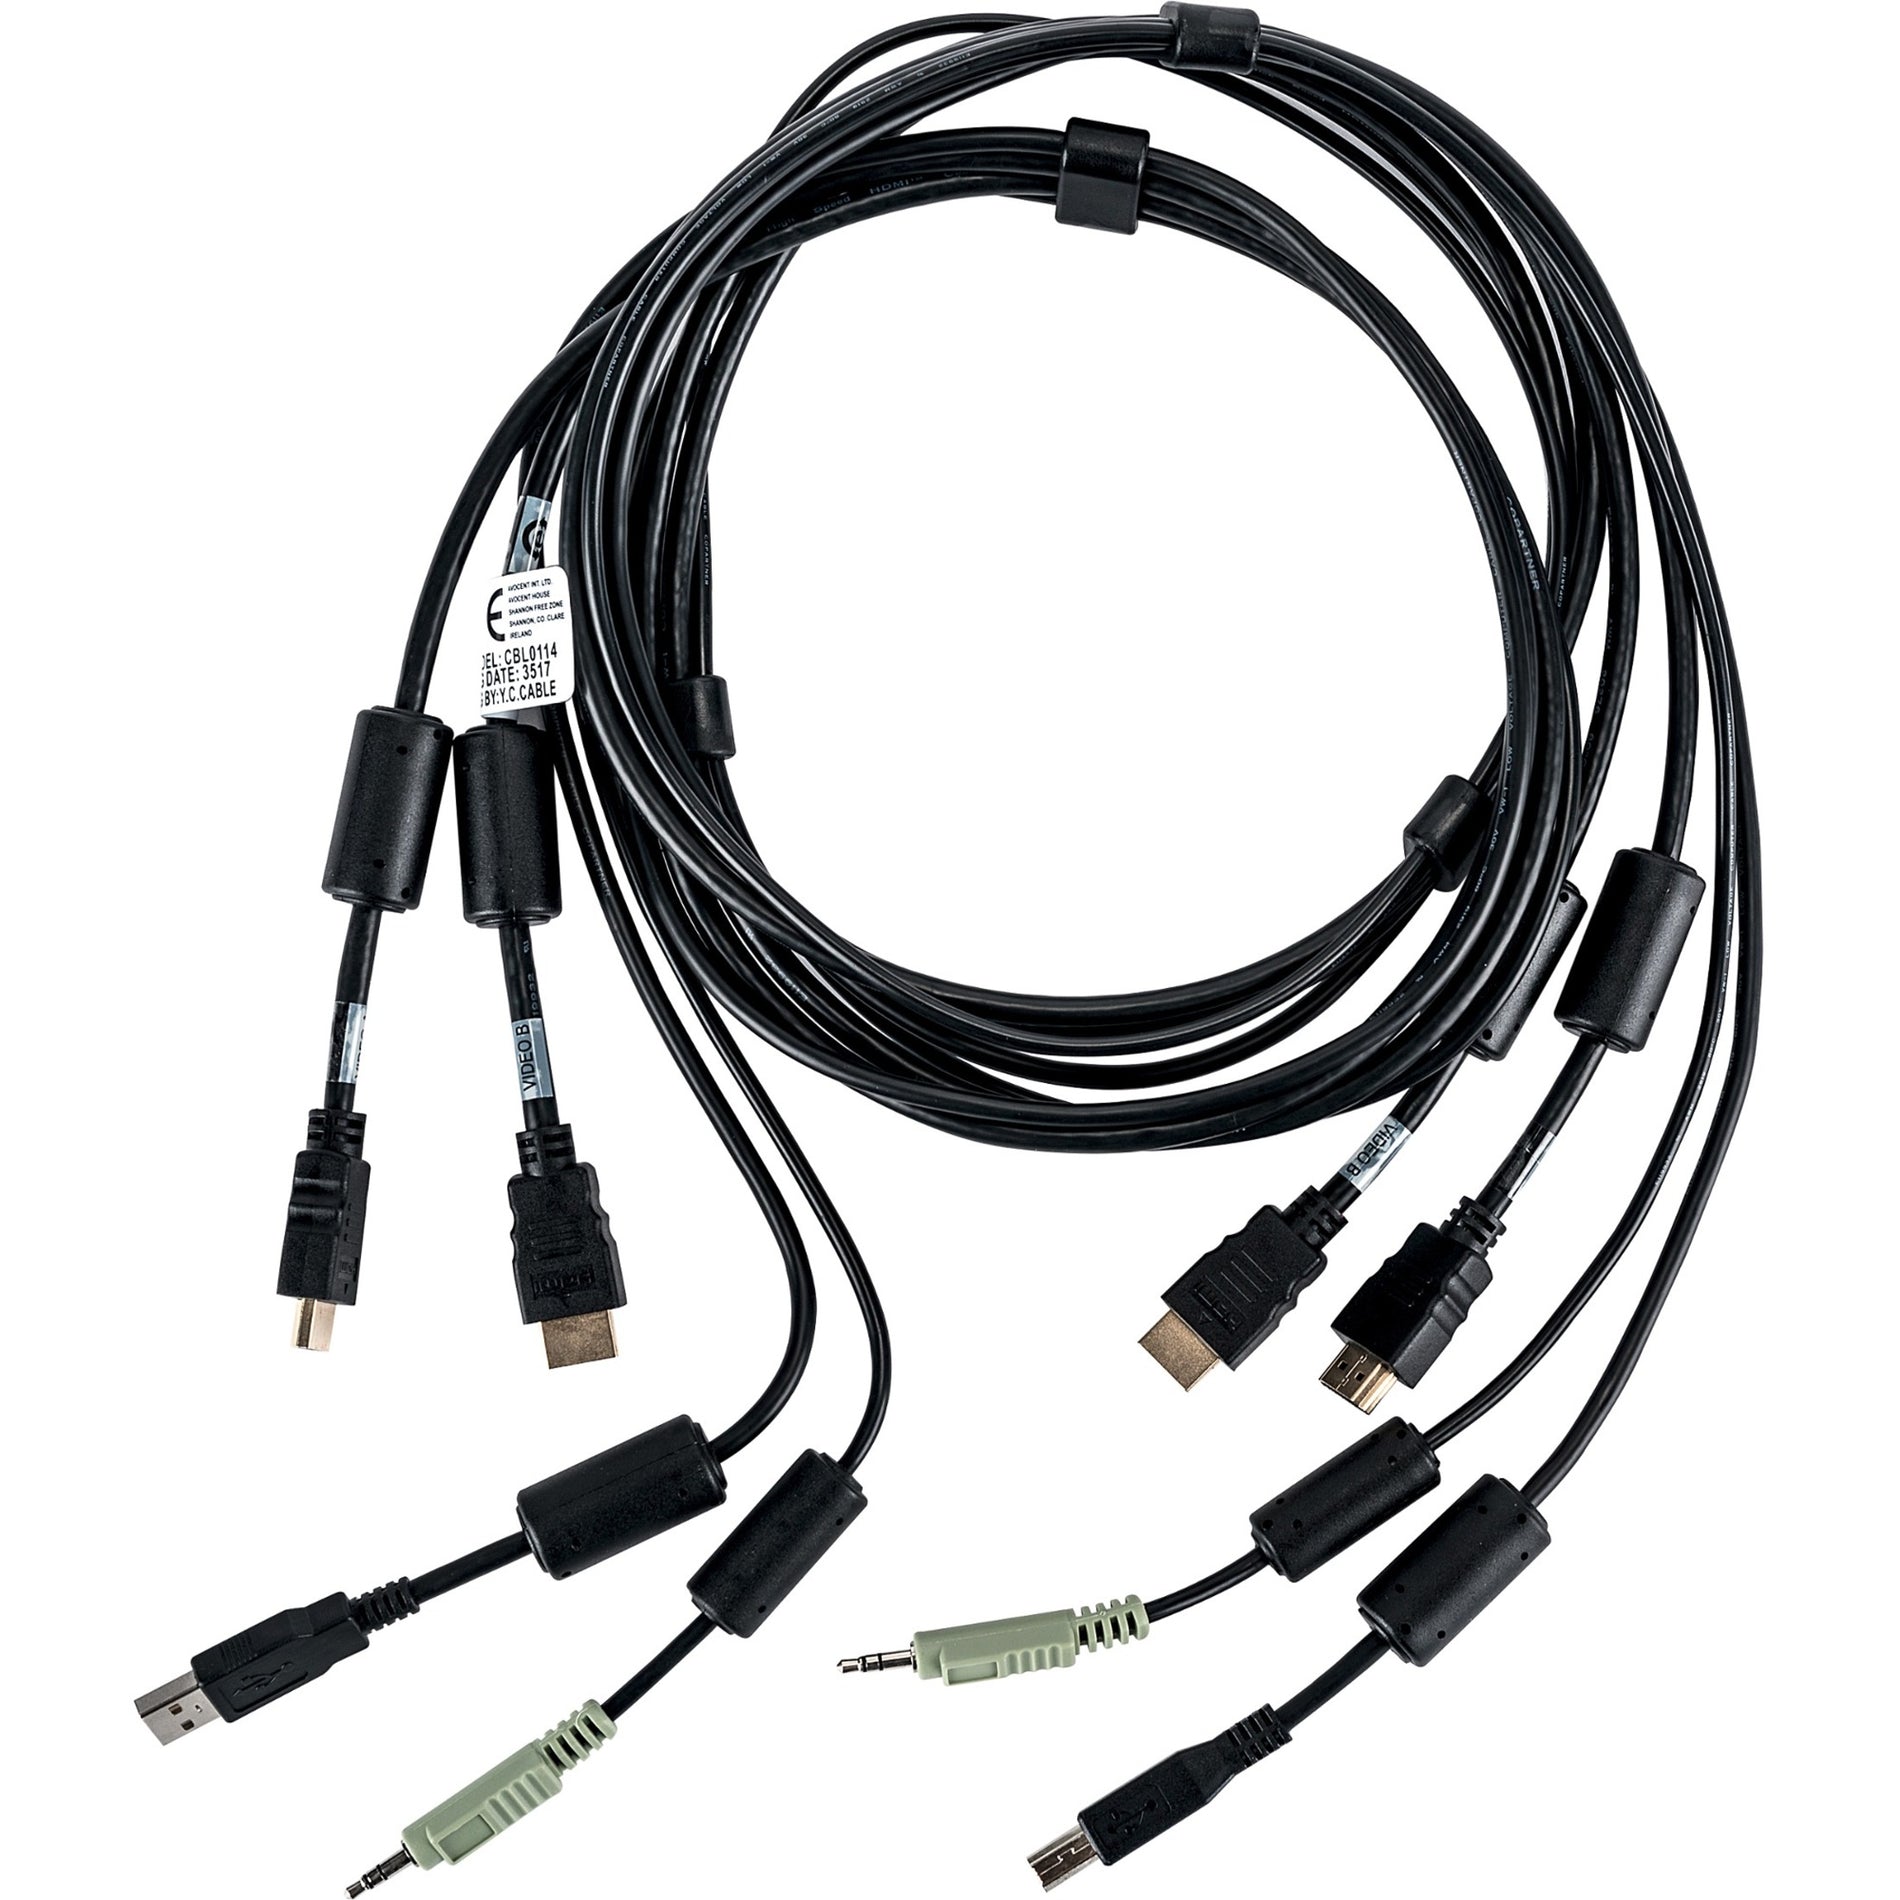 AVOCENT CBL0115 KVM Cable, Dual HDMI and Audio, 10 ft. for Vertiv Avocent SV and SC Series Switches